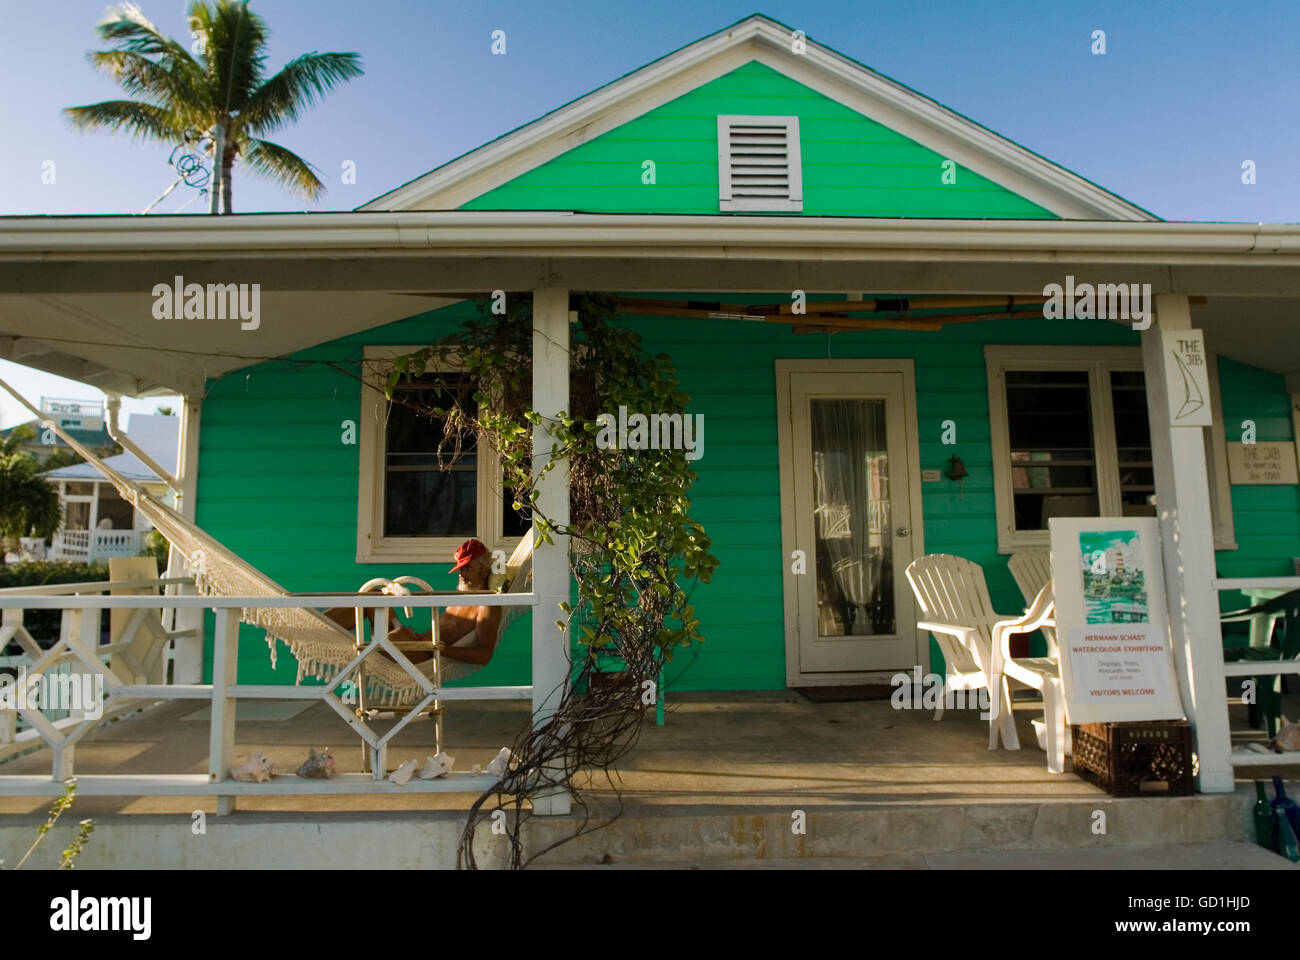 Typical loyalist house, Hope Town, Elbow Cay, Abacos. Bahamas. Relaxing in a hammock. Stock Photo